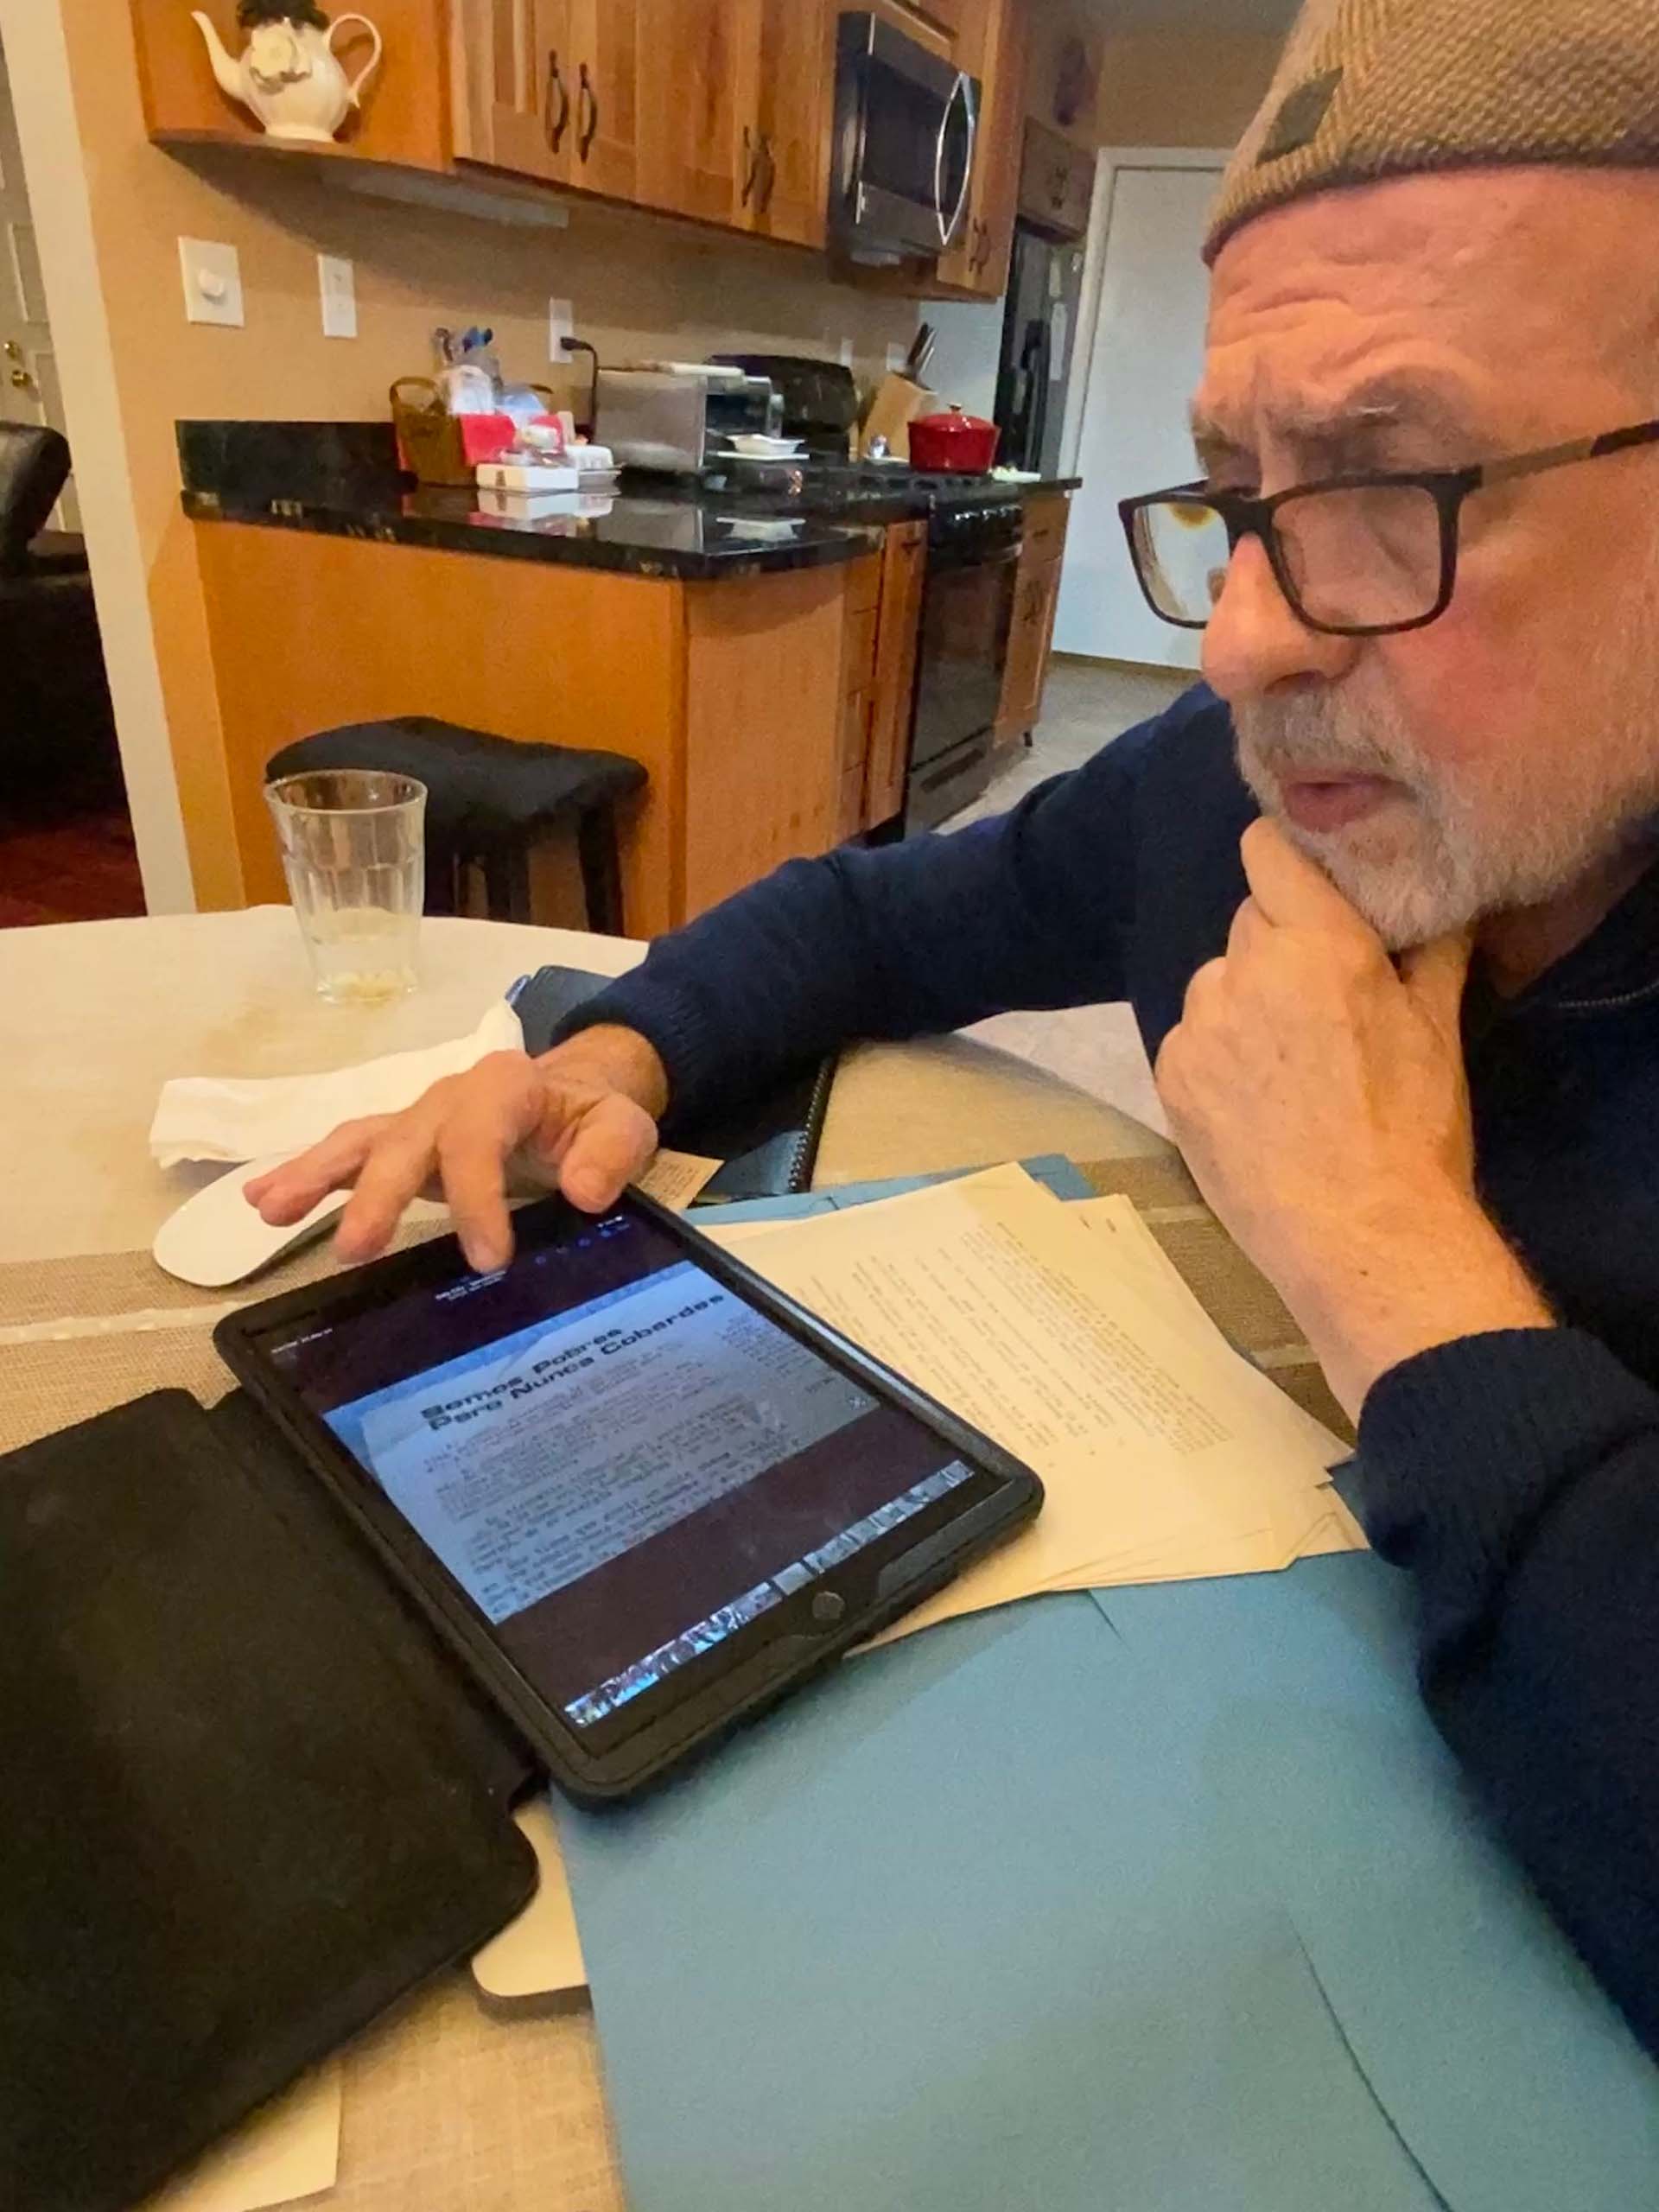 Man in glasses shows an article that he's loaded onto his iPad.